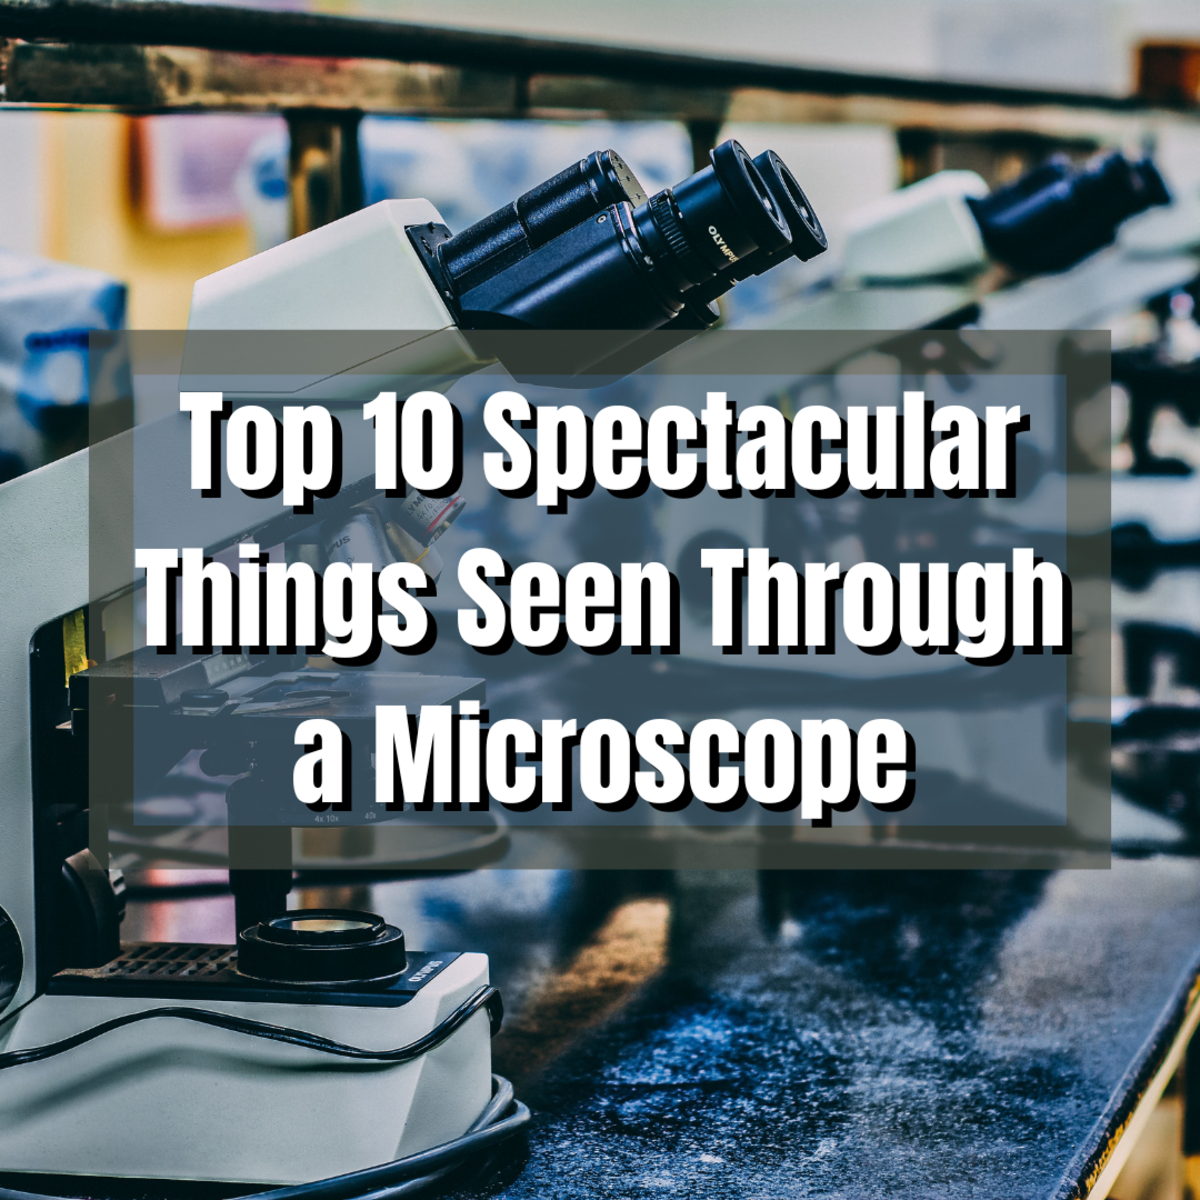 Top 10 Spectacular Things Seen Through a Microscope